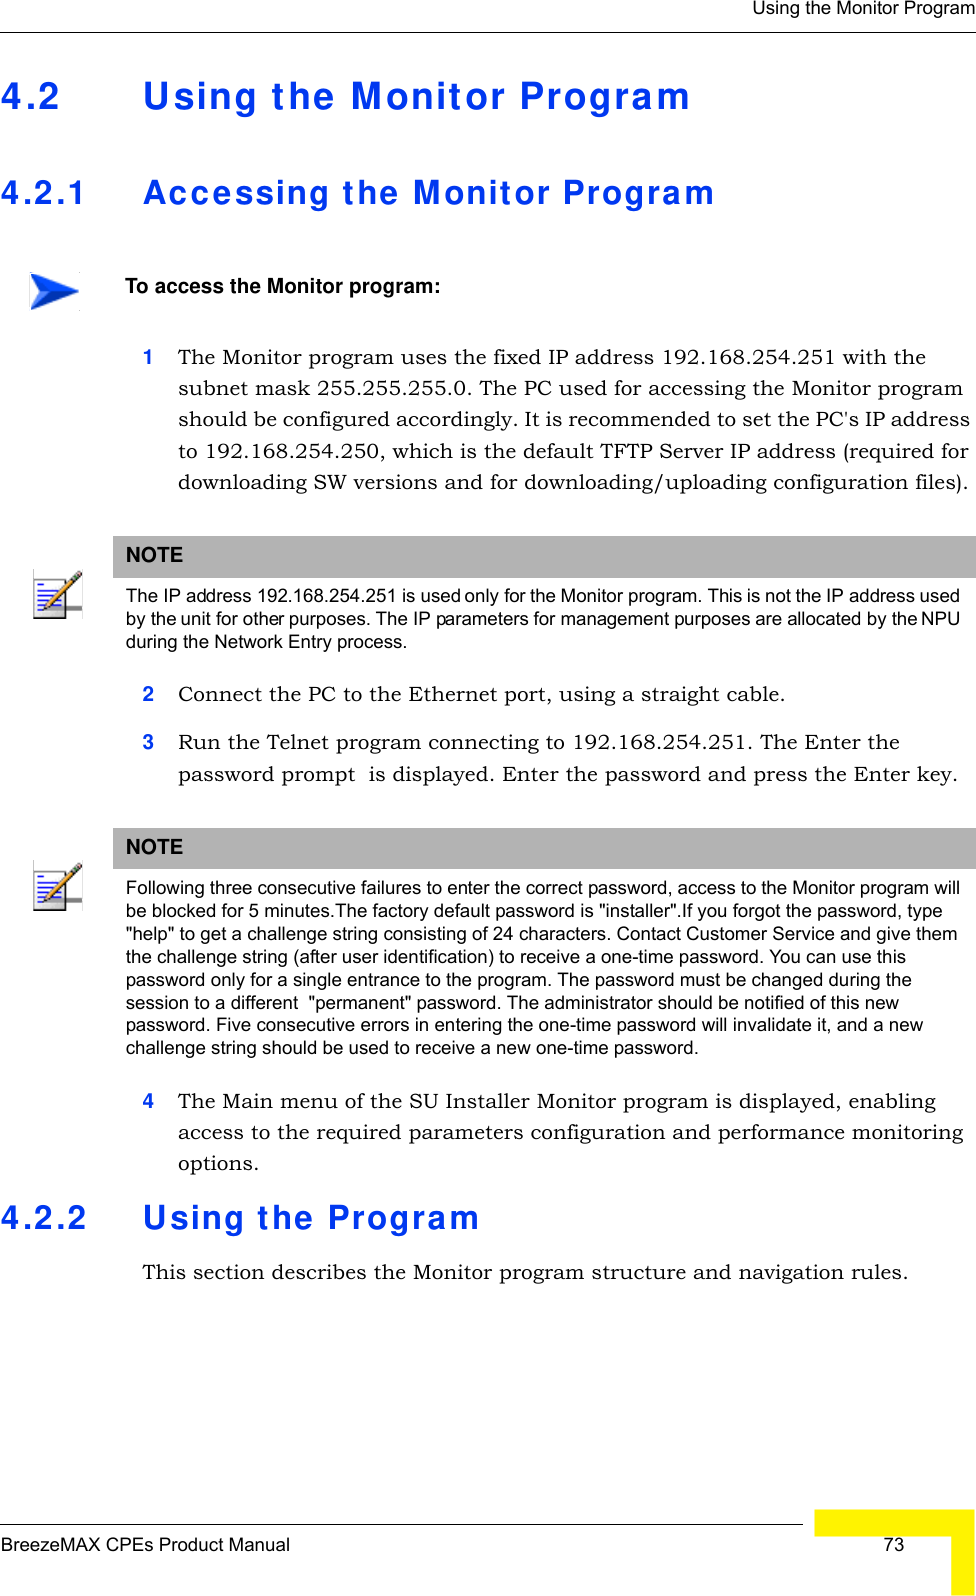 Using the Monitor ProgramBreezeMAX CPEs Product Manual  734.2 Using the Monitor Program4.2.1 Accessing the Monitor Program1The Monitor program uses the fixed IP address 192.168.254.251 with the subnet mask 255.255.255.0. The PC used for accessing the Monitor program should be configured accordingly. It is recommended to set the PC&apos;s IP address to 192.168.254.250, which is the default TFTP Server IP address (required for downloading SW versions and for downloading/uploading configuration files).2Connect the PC to the Ethernet port, using a straight cable.3Run the Telnet program connecting to 192.168.254.251. The Enter the password prompt  is displayed. Enter the password and press the Enter key.4The Main menu of the SU Installer Monitor program is displayed, enabling access to the required parameters configuration and performance monitoring options.4.2.2 Using the ProgramThis section describes the Monitor program structure and navigation rules.To access the Monitor program:NOTEThe IP address 192.168.254.251 is used only for the Monitor program. This is not the IP address used by the unit for other purposes. The IP parameters for management purposes are allocated by the NPU during the Network Entry process.NOTEFollowing three consecutive failures to enter the correct password, access to the Monitor program will be blocked for 5 minutes.The factory default password is &quot;installer&quot;.If you forgot the password, type &quot;help&quot; to get a challenge string consisting of 24 characters. Contact Customer Service and give them the challenge string (after user identification) to receive a one-time password. You can use this password only for a single entrance to the program. The password must be changed during the session to a different  &quot;permanent&quot; password. The administrator should be notified of this new password. Five consecutive errors in entering the one-time password will invalidate it, and a new challenge string should be used to receive a new one-time password.